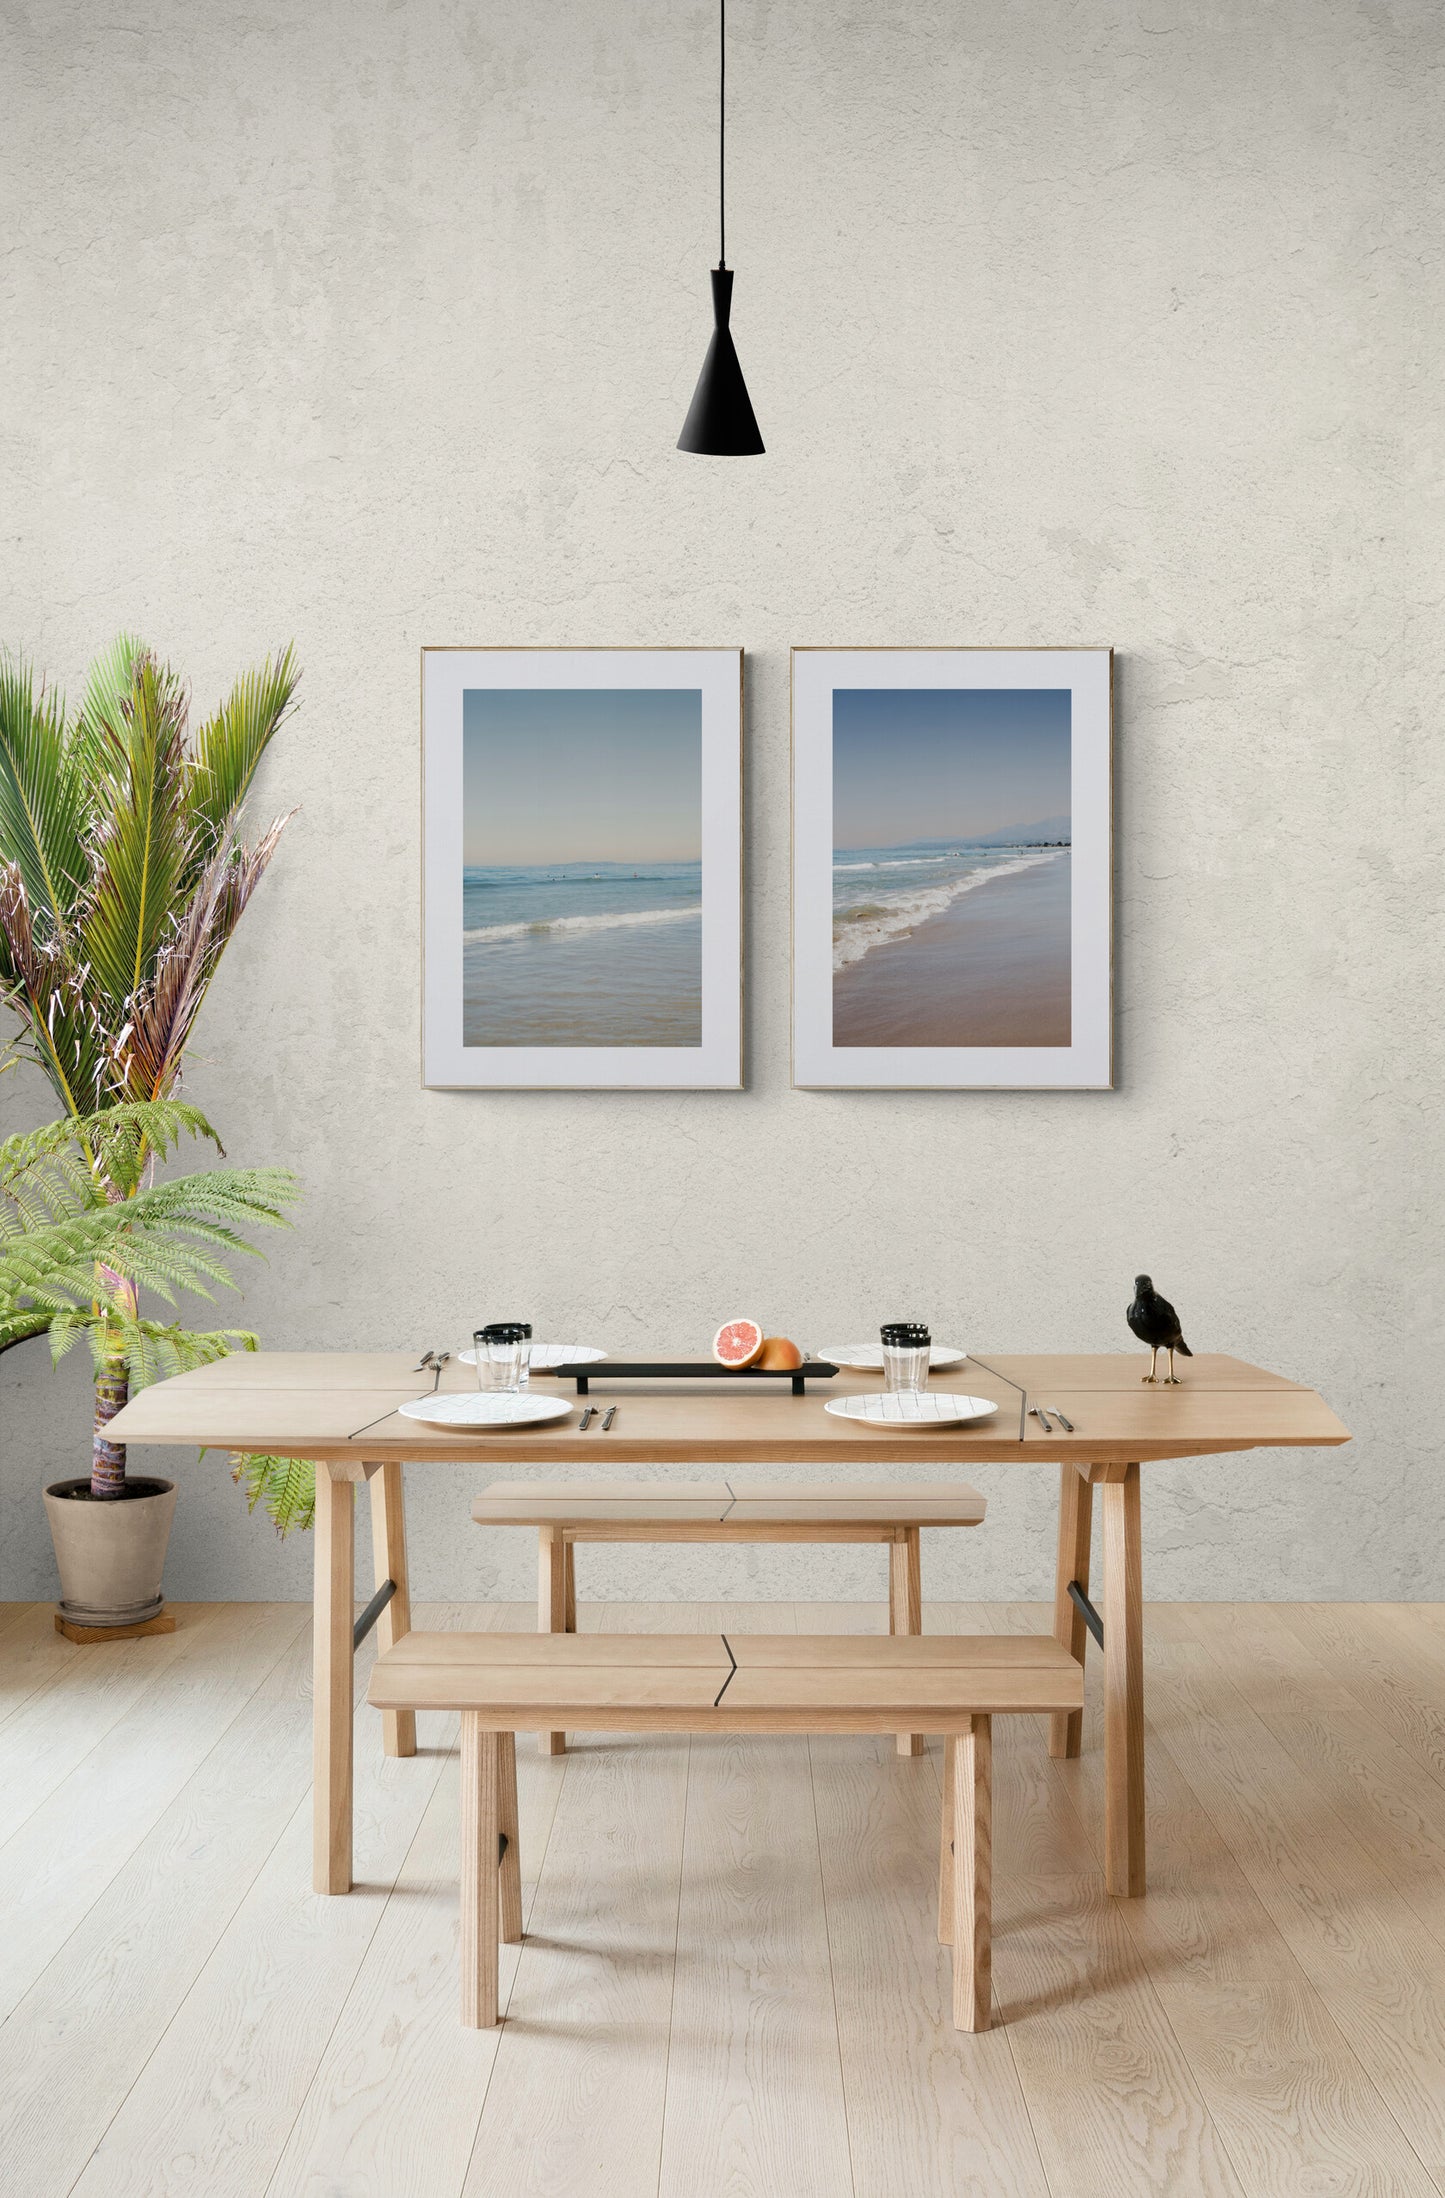 Two Photographs of Carpinteria State Beach as wall art in a kitchen